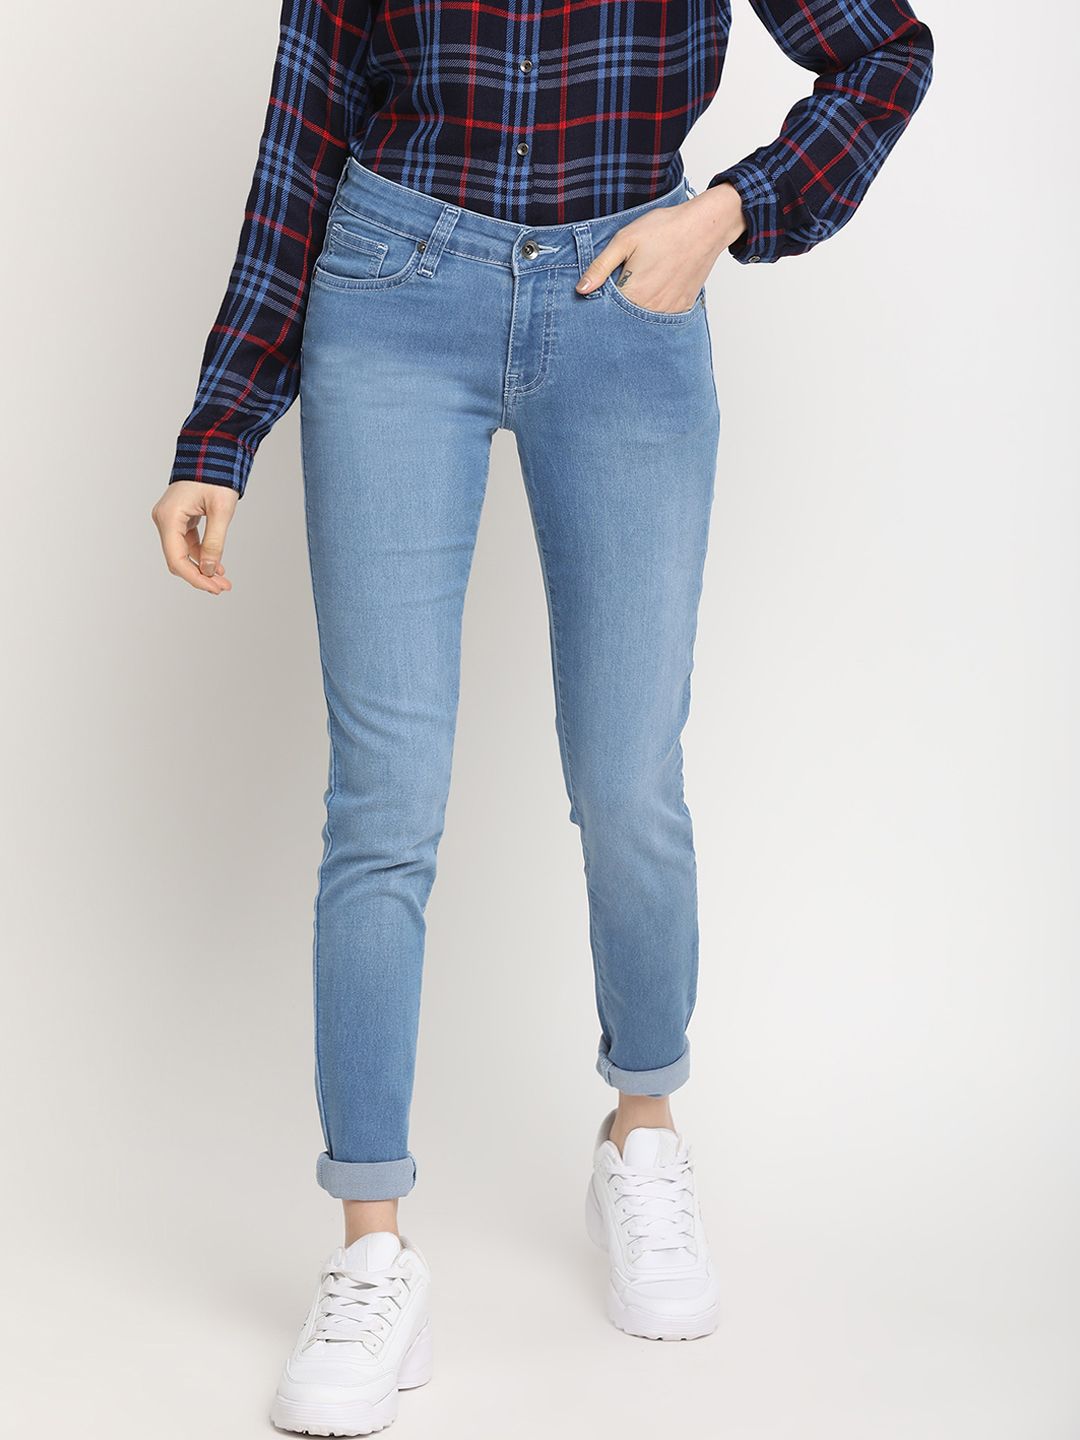 Pepe Jeans Women Blue Regular Fit Mid-Rise Clean Look Jeans Price in India